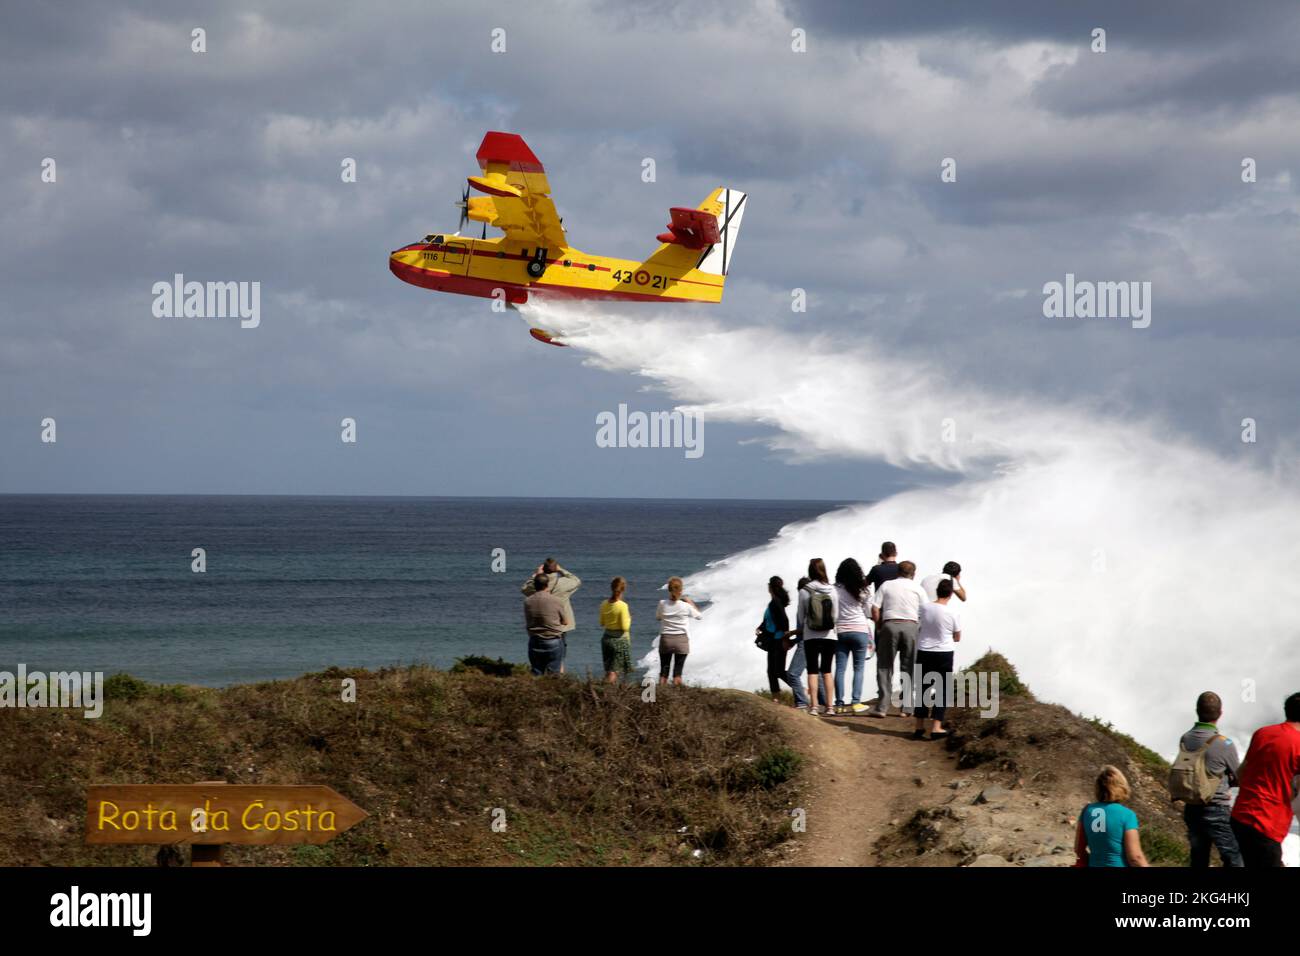 Small firefightermen plane throwing water in front of the coast with people watching it. Playa de las Catedrales, Galicia, Ribadeo, Lugo, Spain. Stock Photo